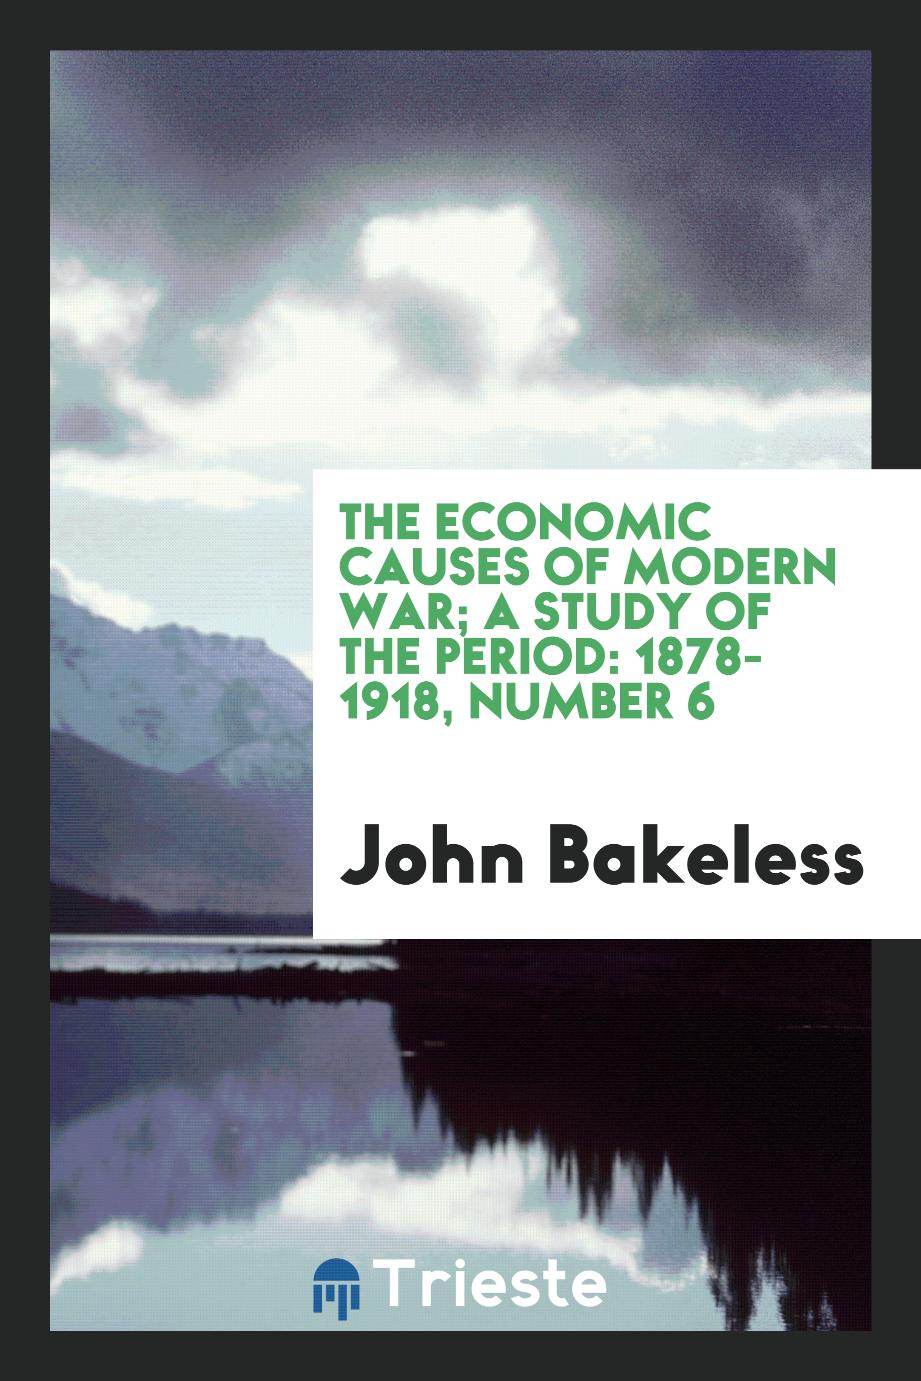 The economic causes of modern war; a study of the period: 1878-1918, Number 6